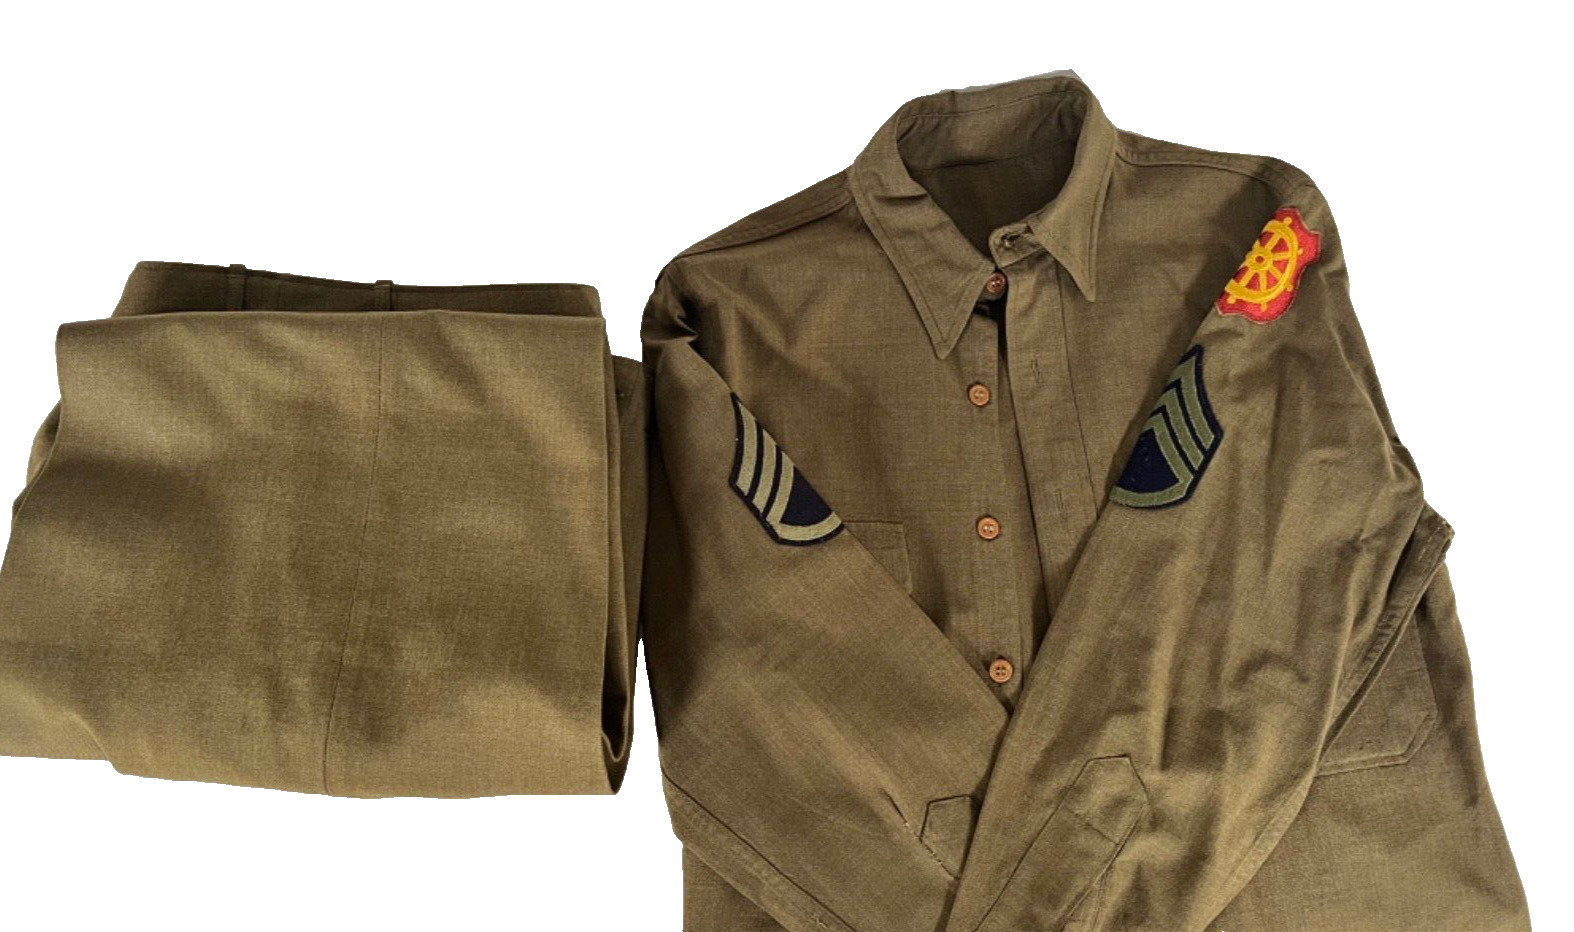 ORIGINAL WWII STAFF SERGEANT SHIRT AND PANTS. EXCELLENT CONDITION